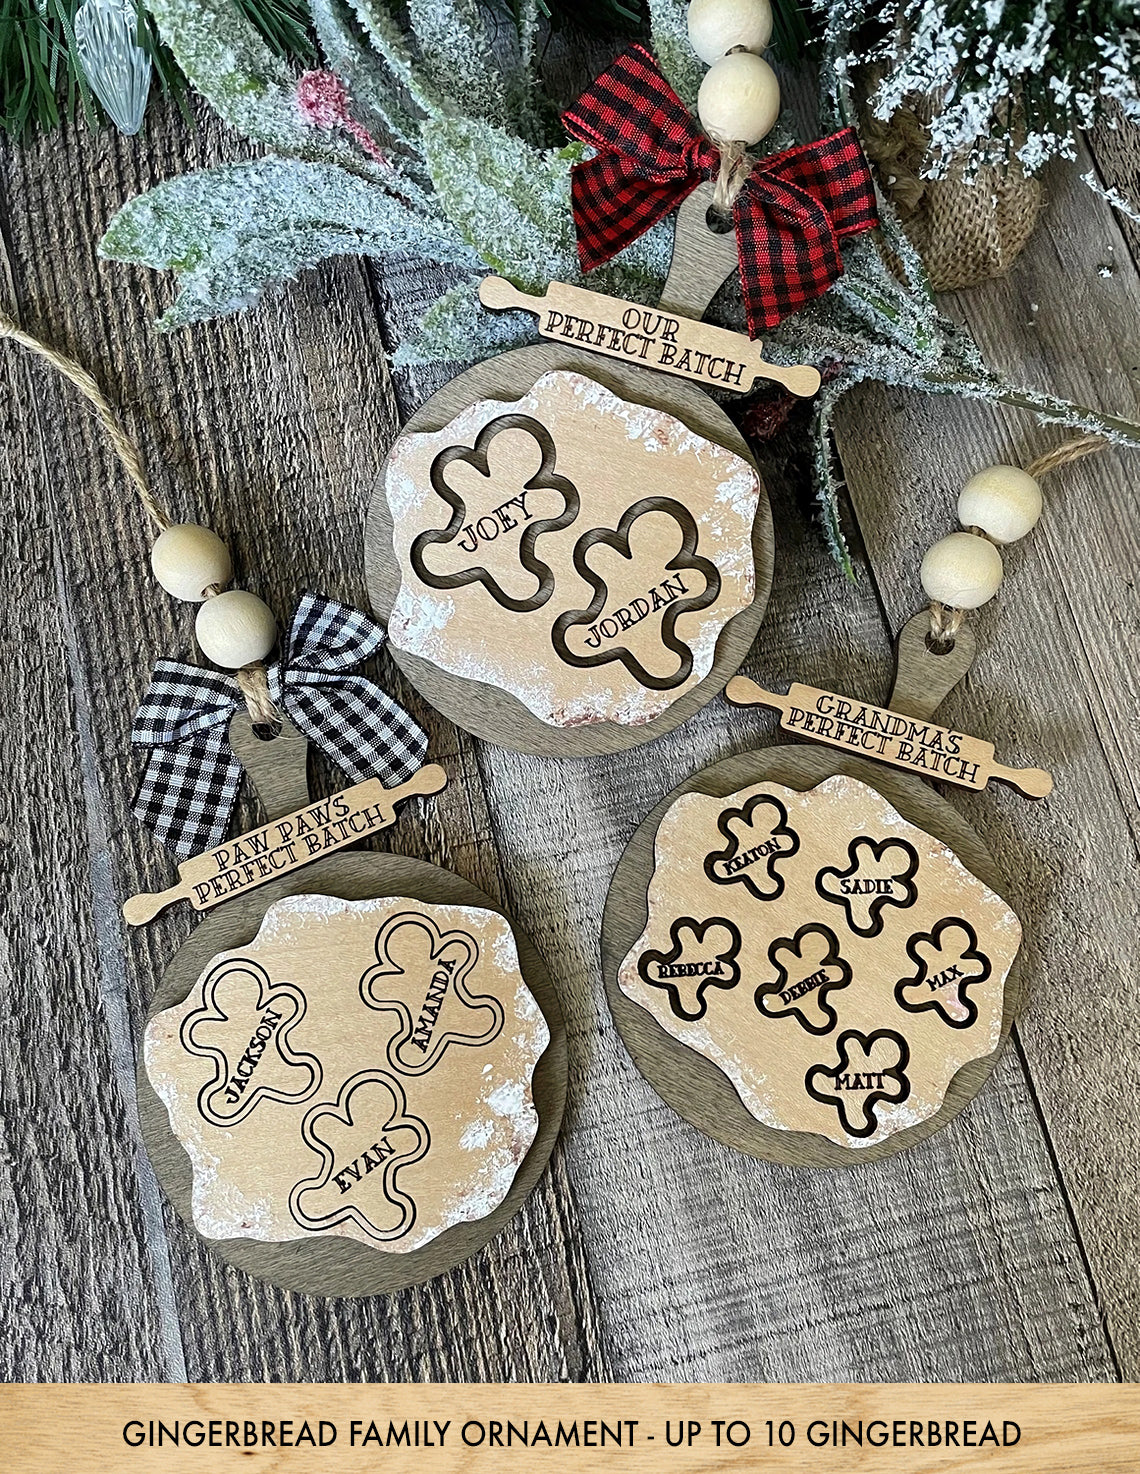 Gingerbread Family Ornament - Multiple Gingerbread Family Ornament